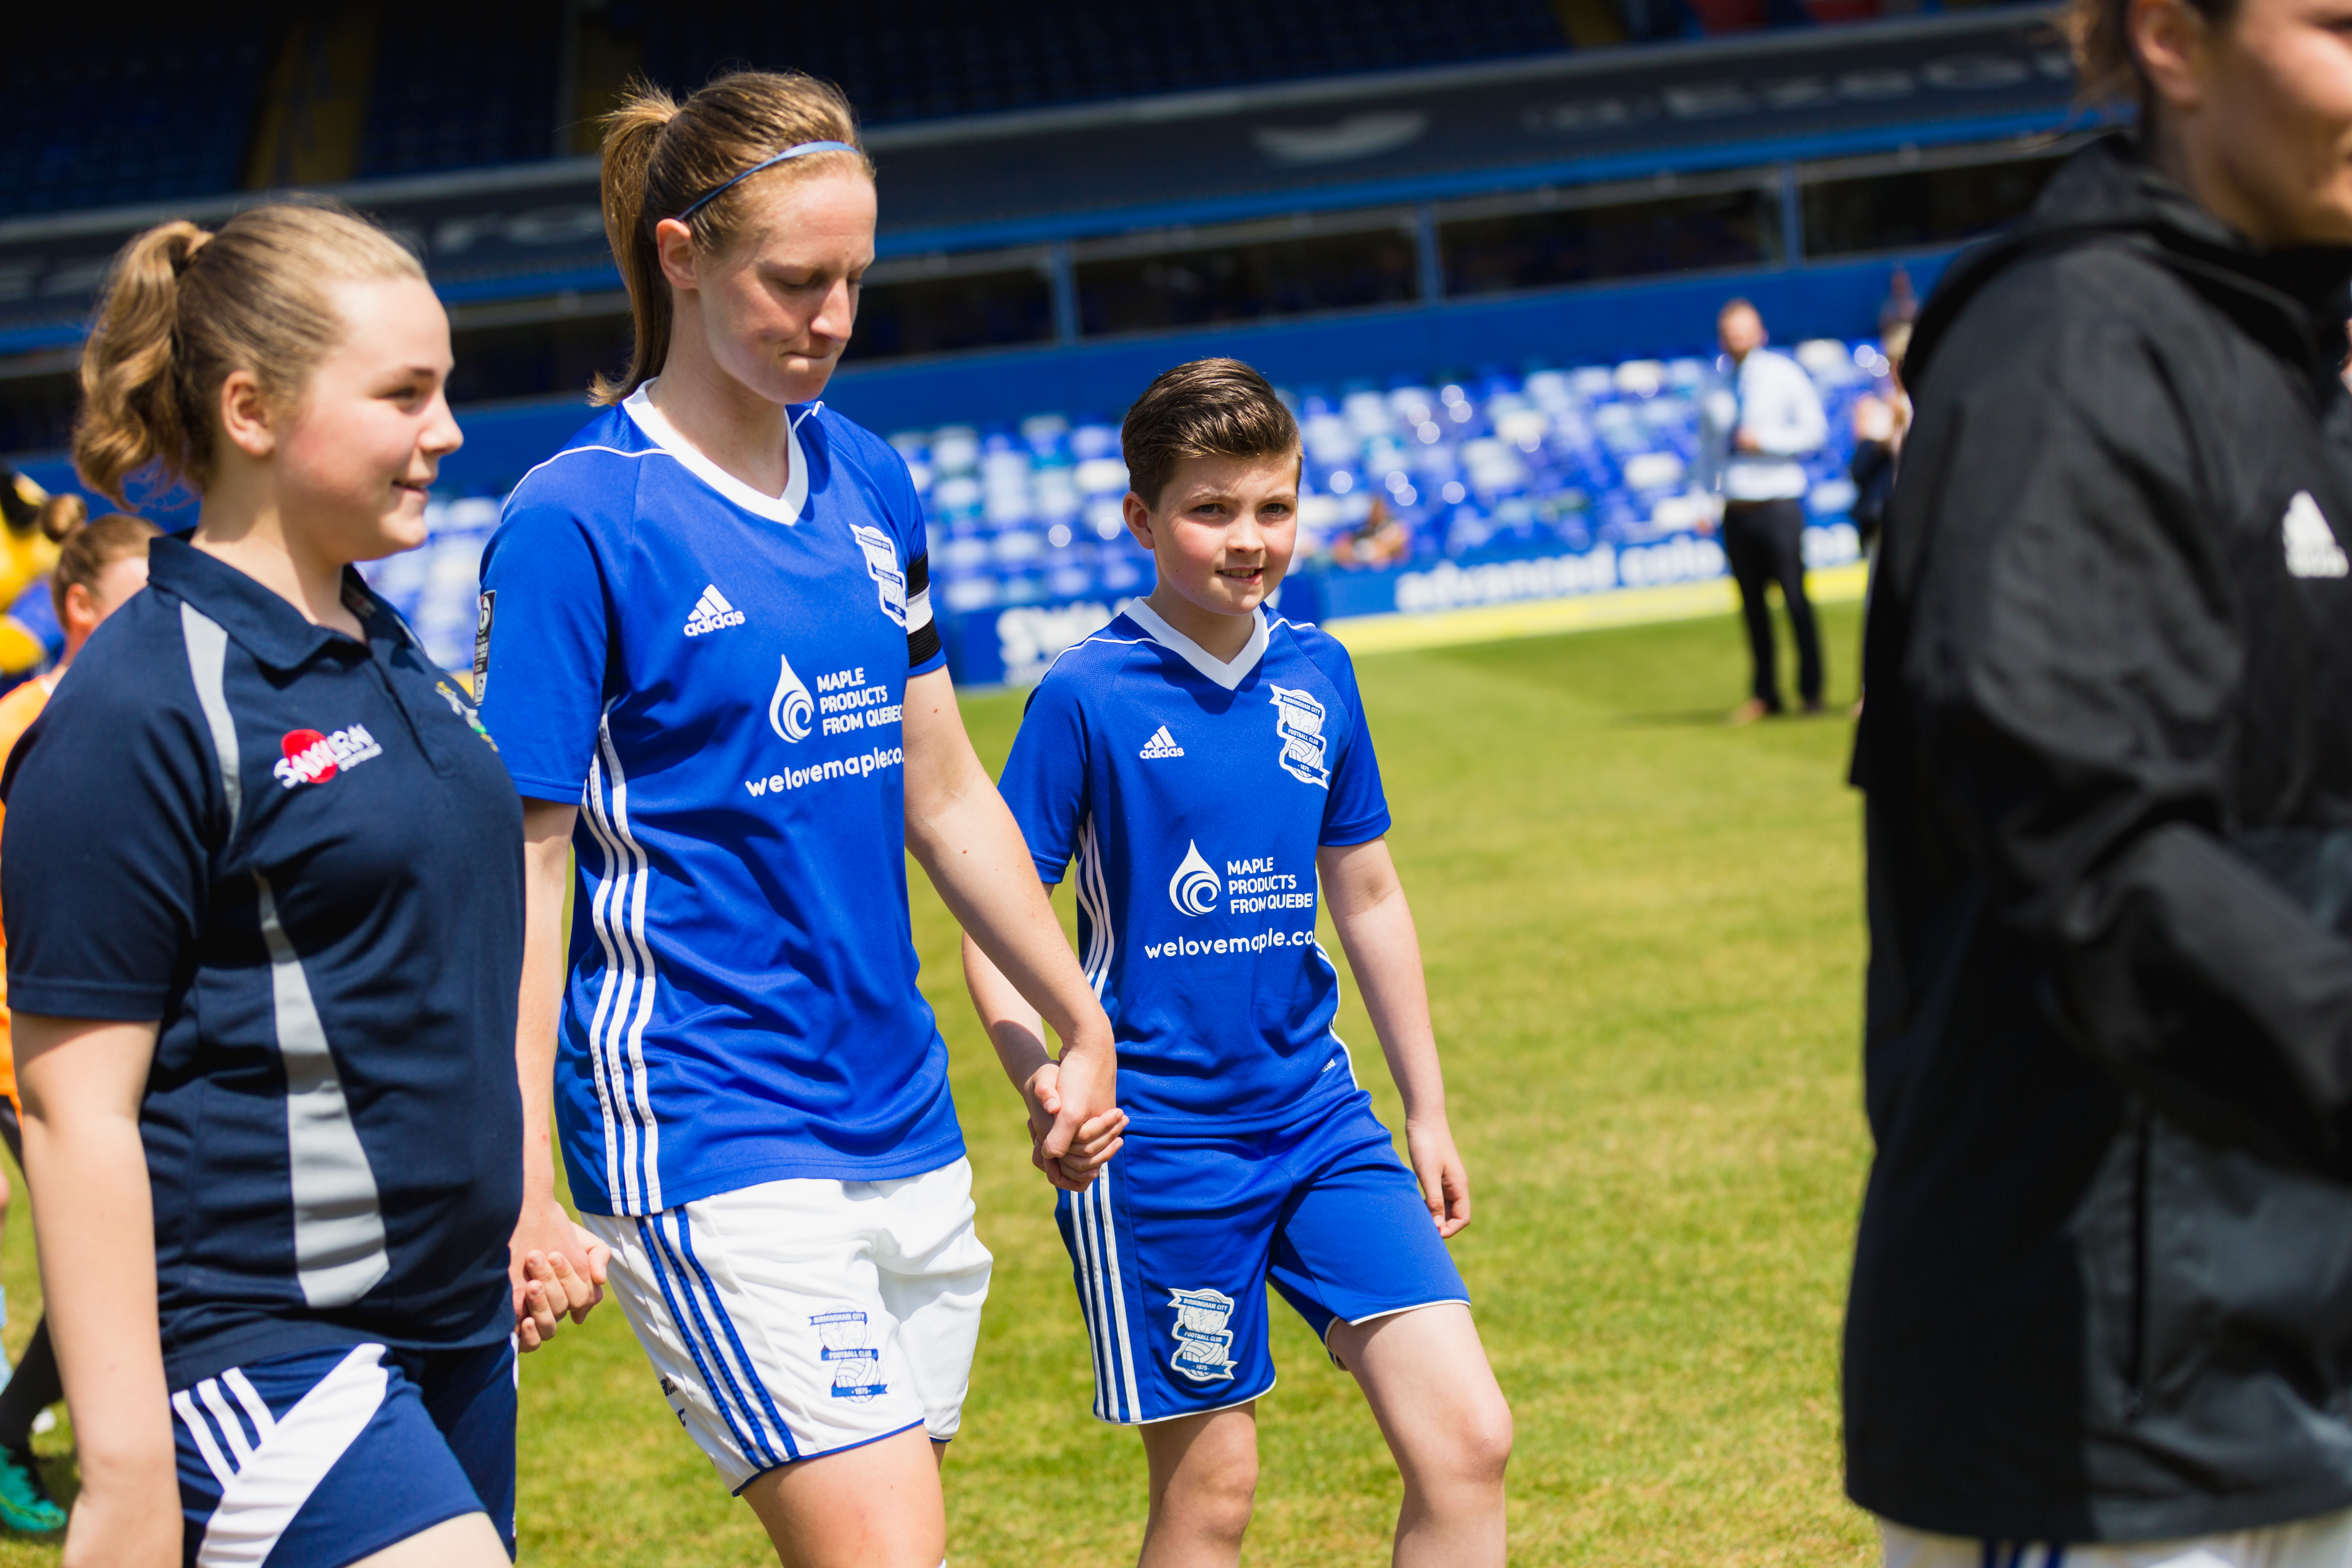 competition winner, Millie Jenkins-Caley, walking out with the Birmingham City Ladies FC players